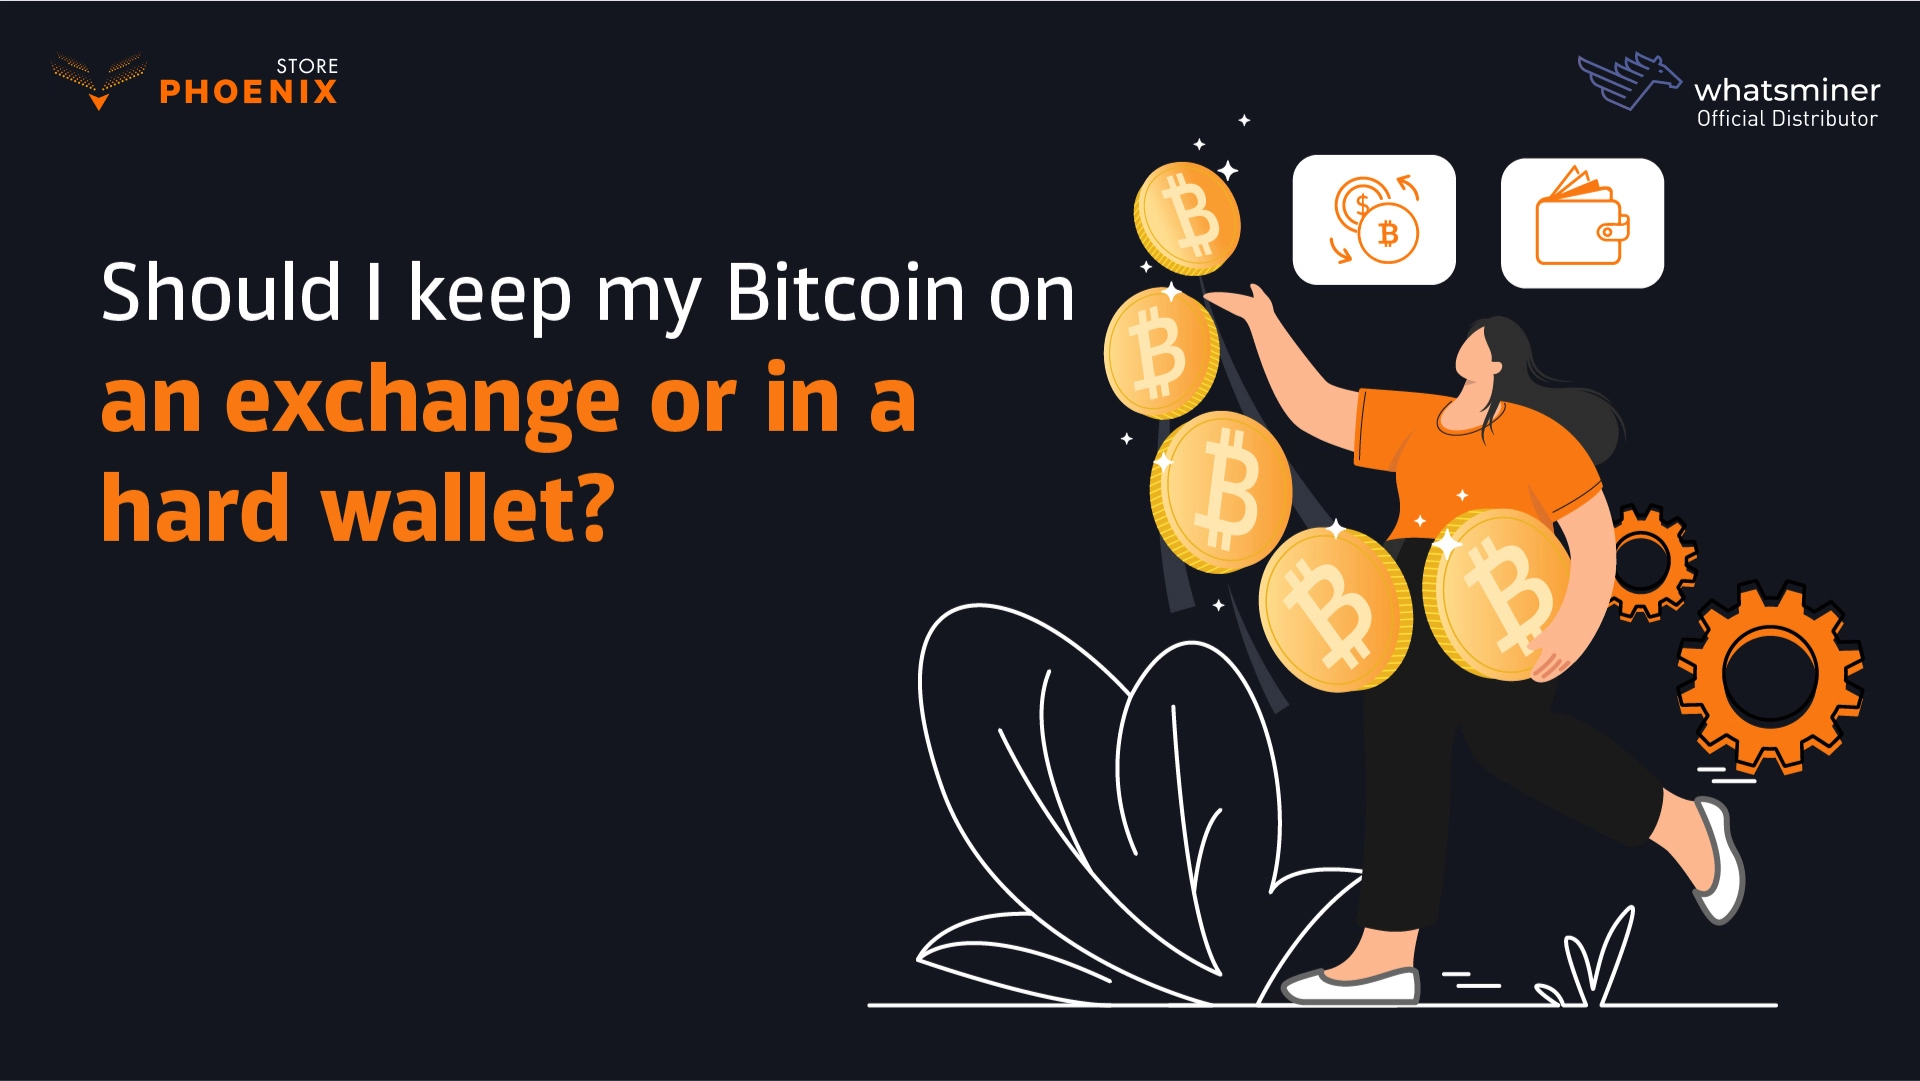 Should I keep my Bitcoin on an exchange or in a hard wallet?